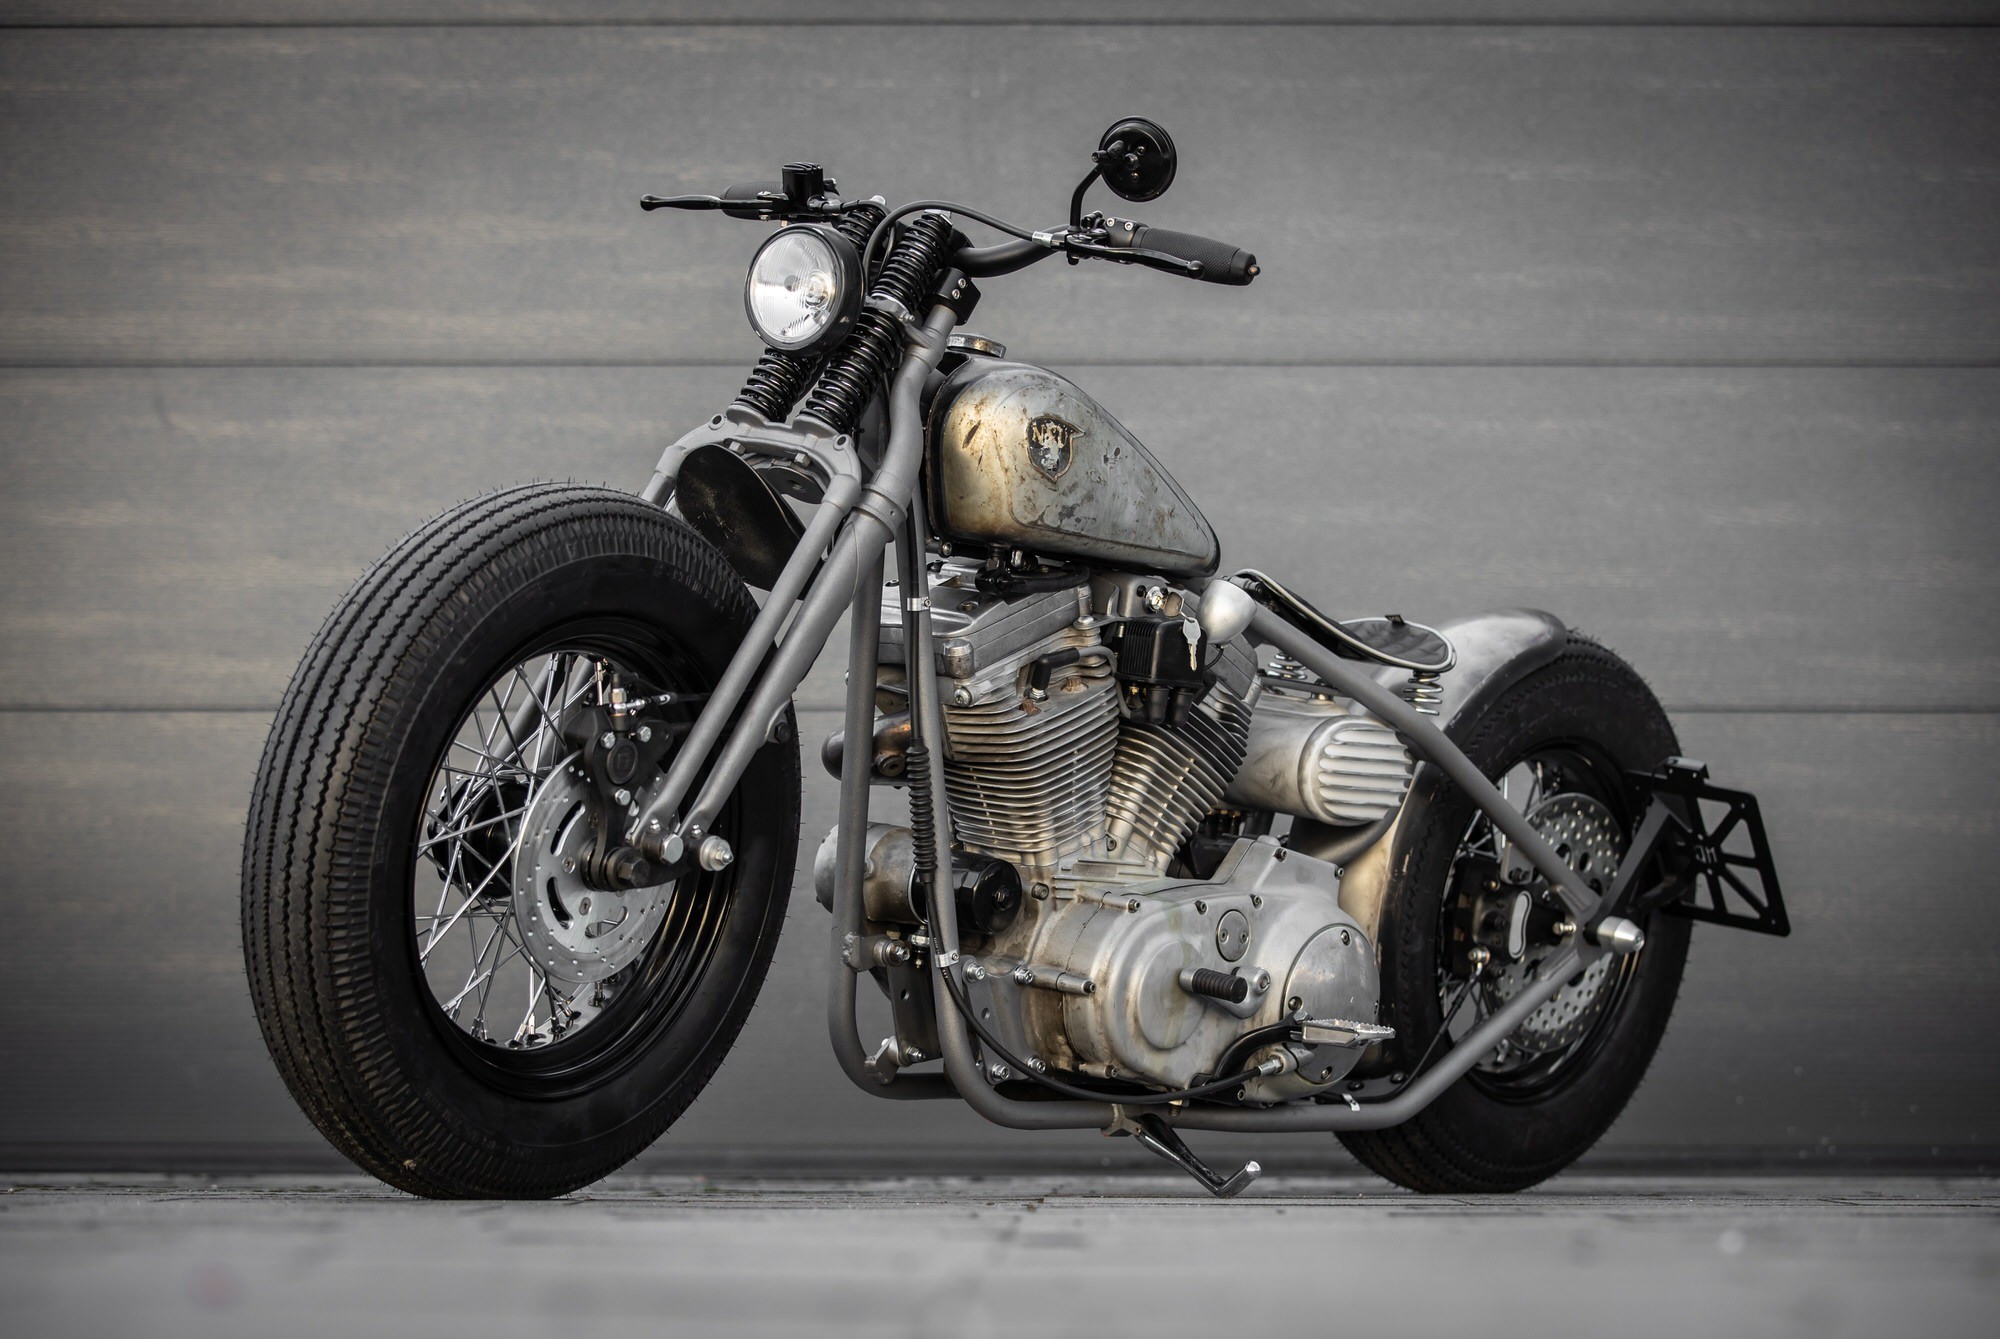 Say Hello to Sirko Sporty, a Custom Hardtail Bobber With Old-School ...